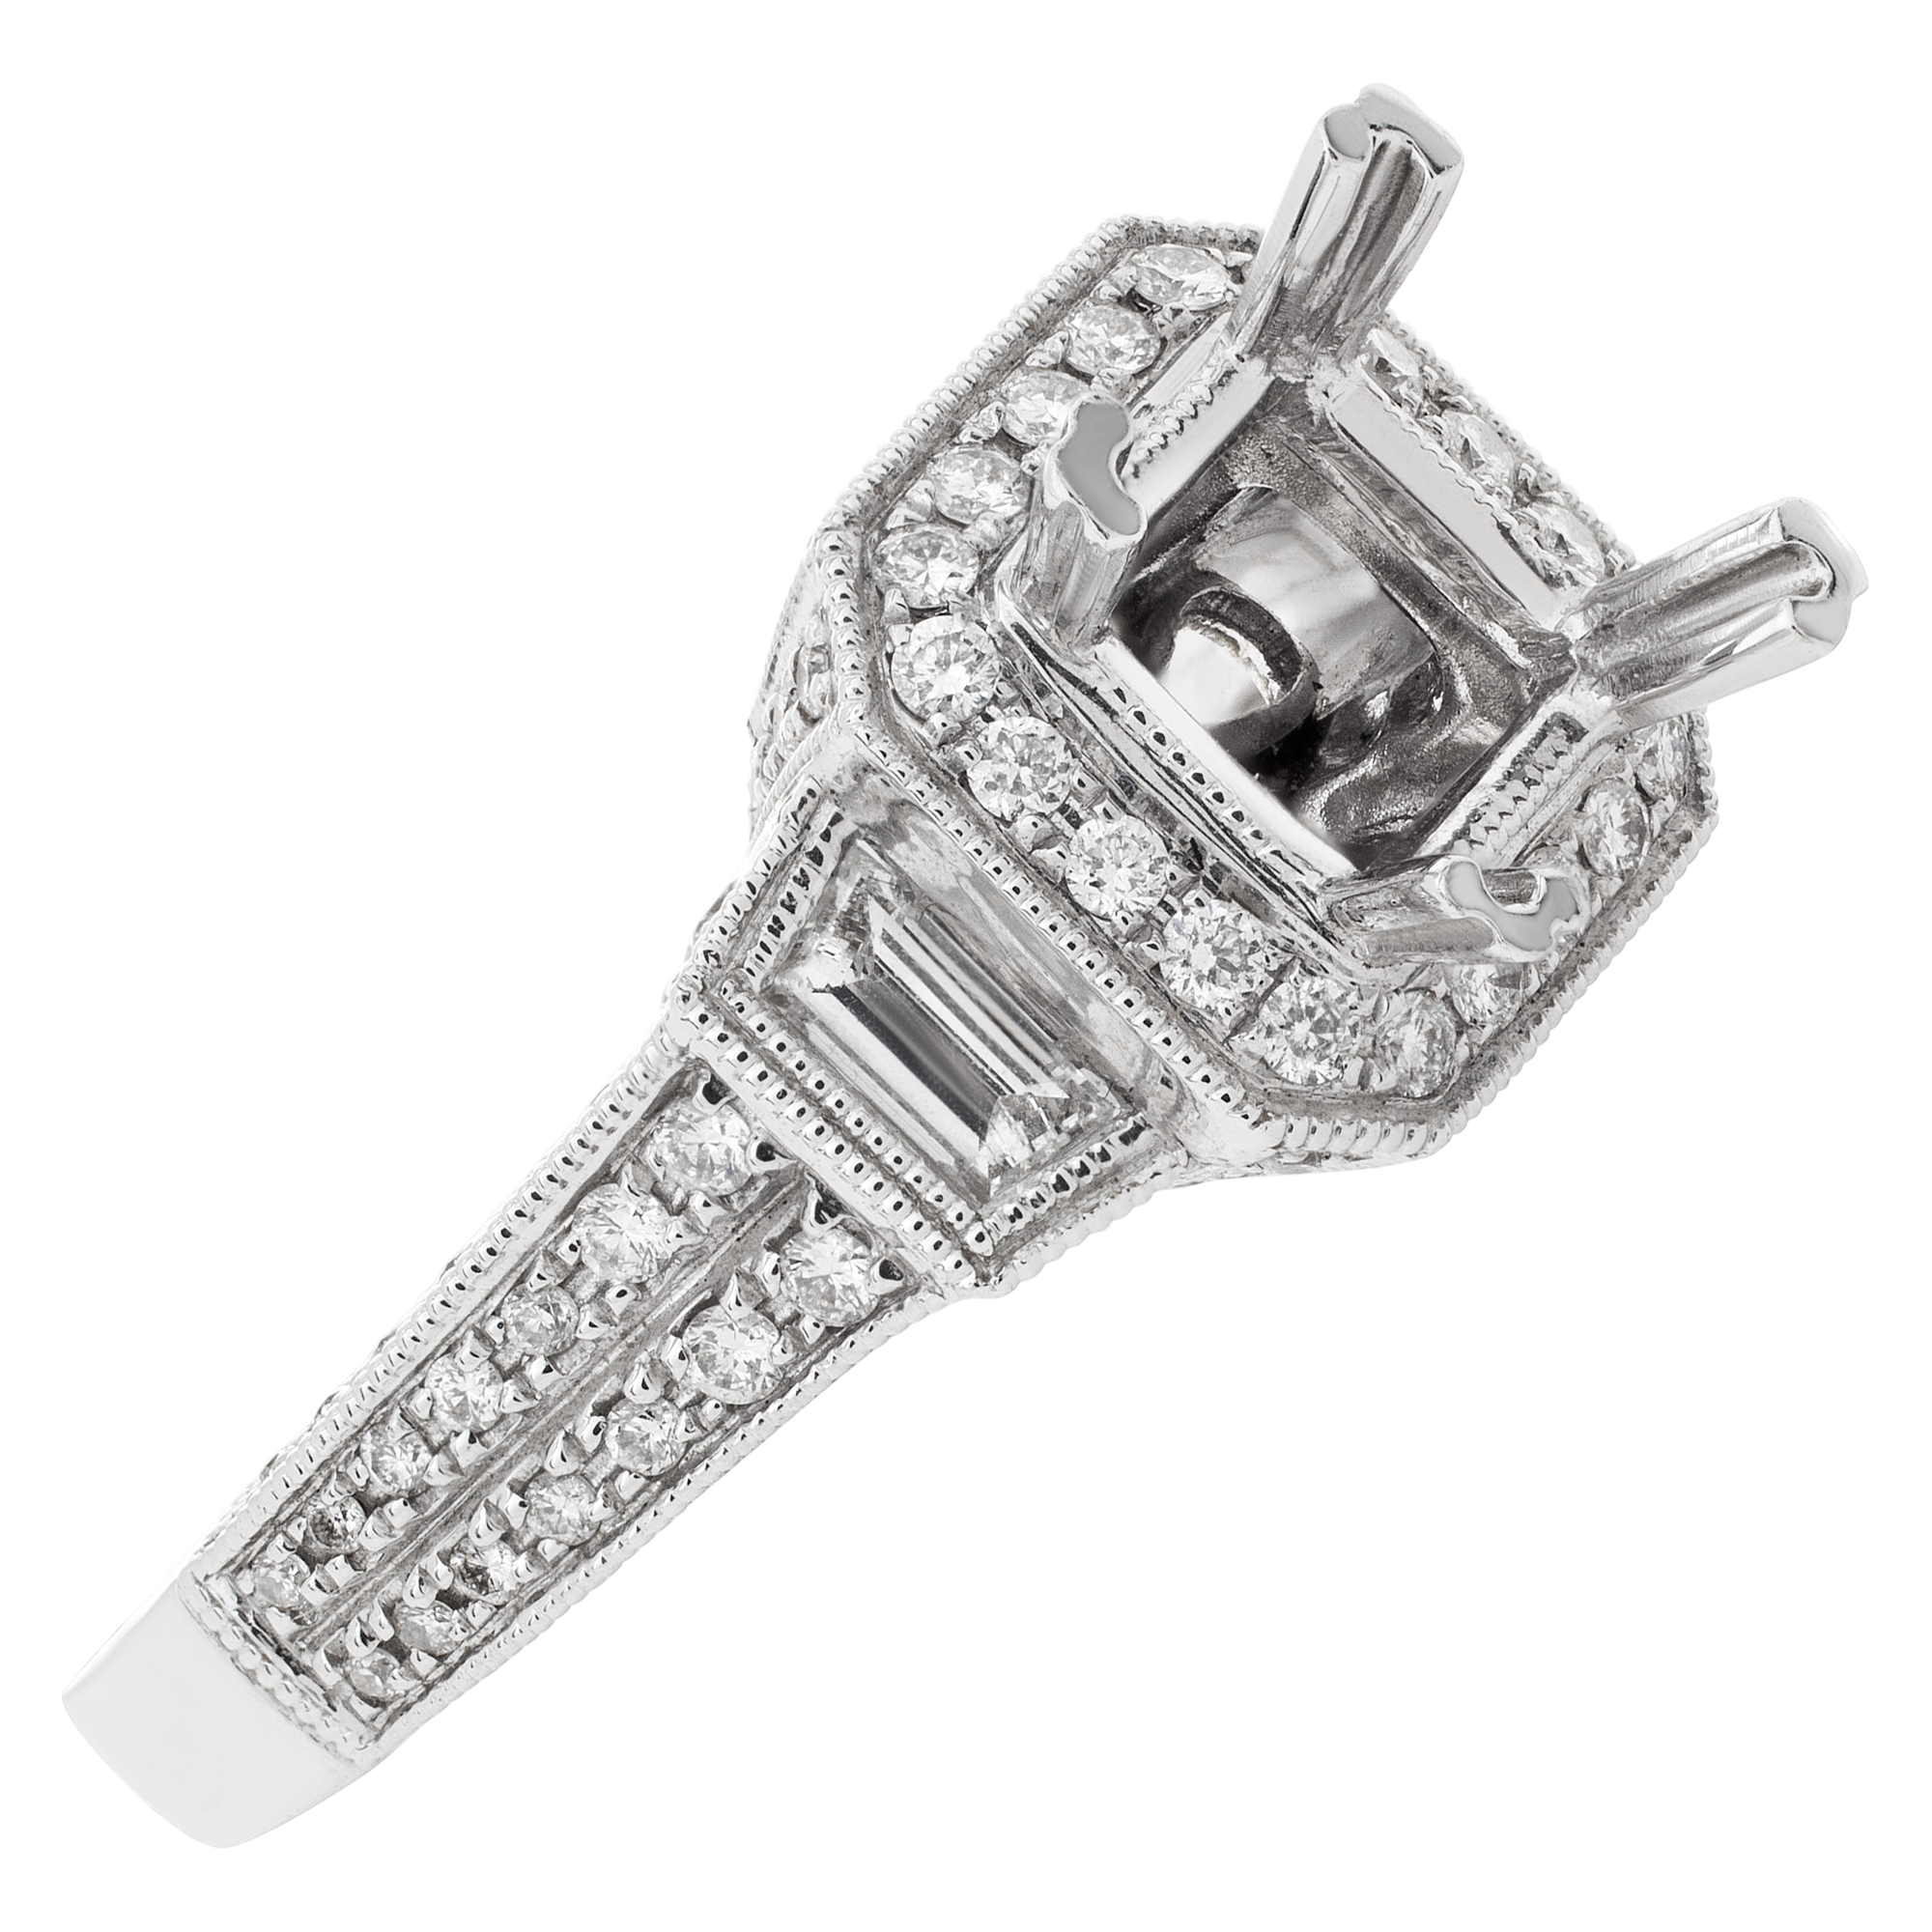 18k white gold mounting for approx. 1 carat square stone, with approx. 1.64 carat diamond. Size 5.5 image 4